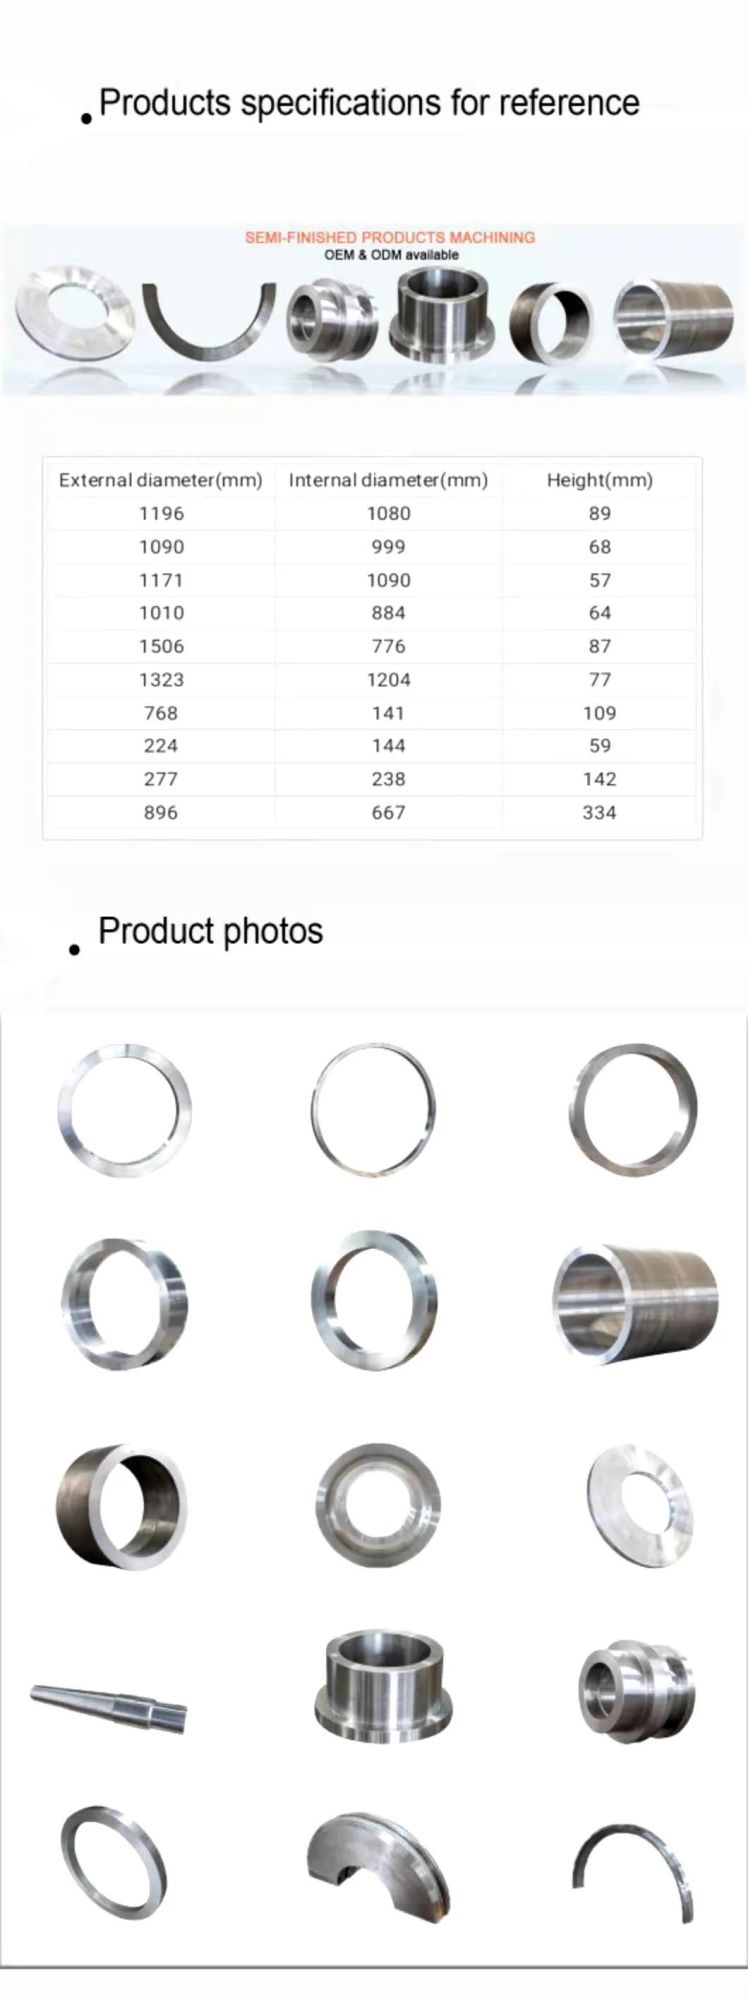 Chemical/ Petroleum / Feed Industry Equipment Machinery Parts Processing Shaft